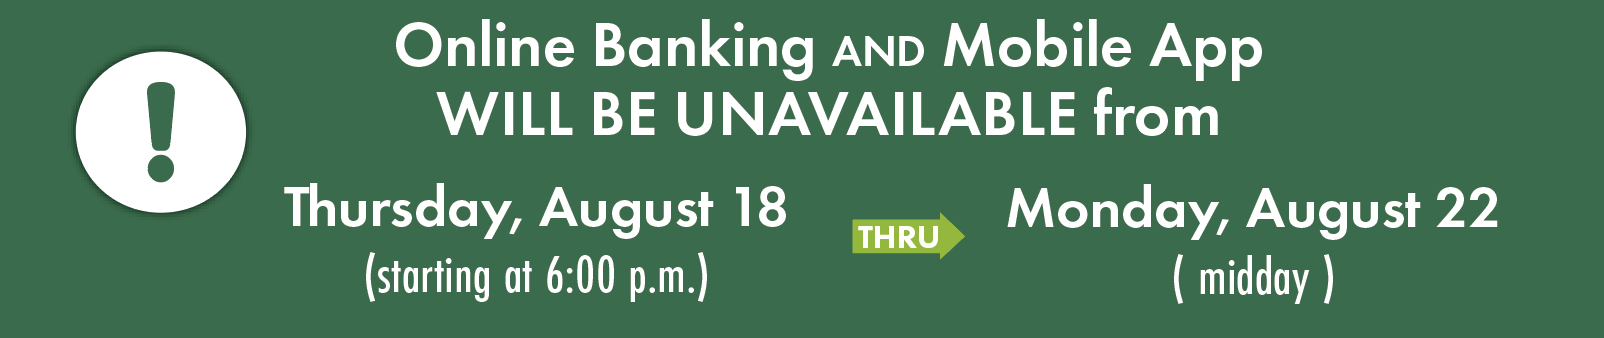 Online Banking and Mobile App will be unavailable fromThursday, August 18 (starting at 6:00 p.m.) through Monday, August 22 ( midday )